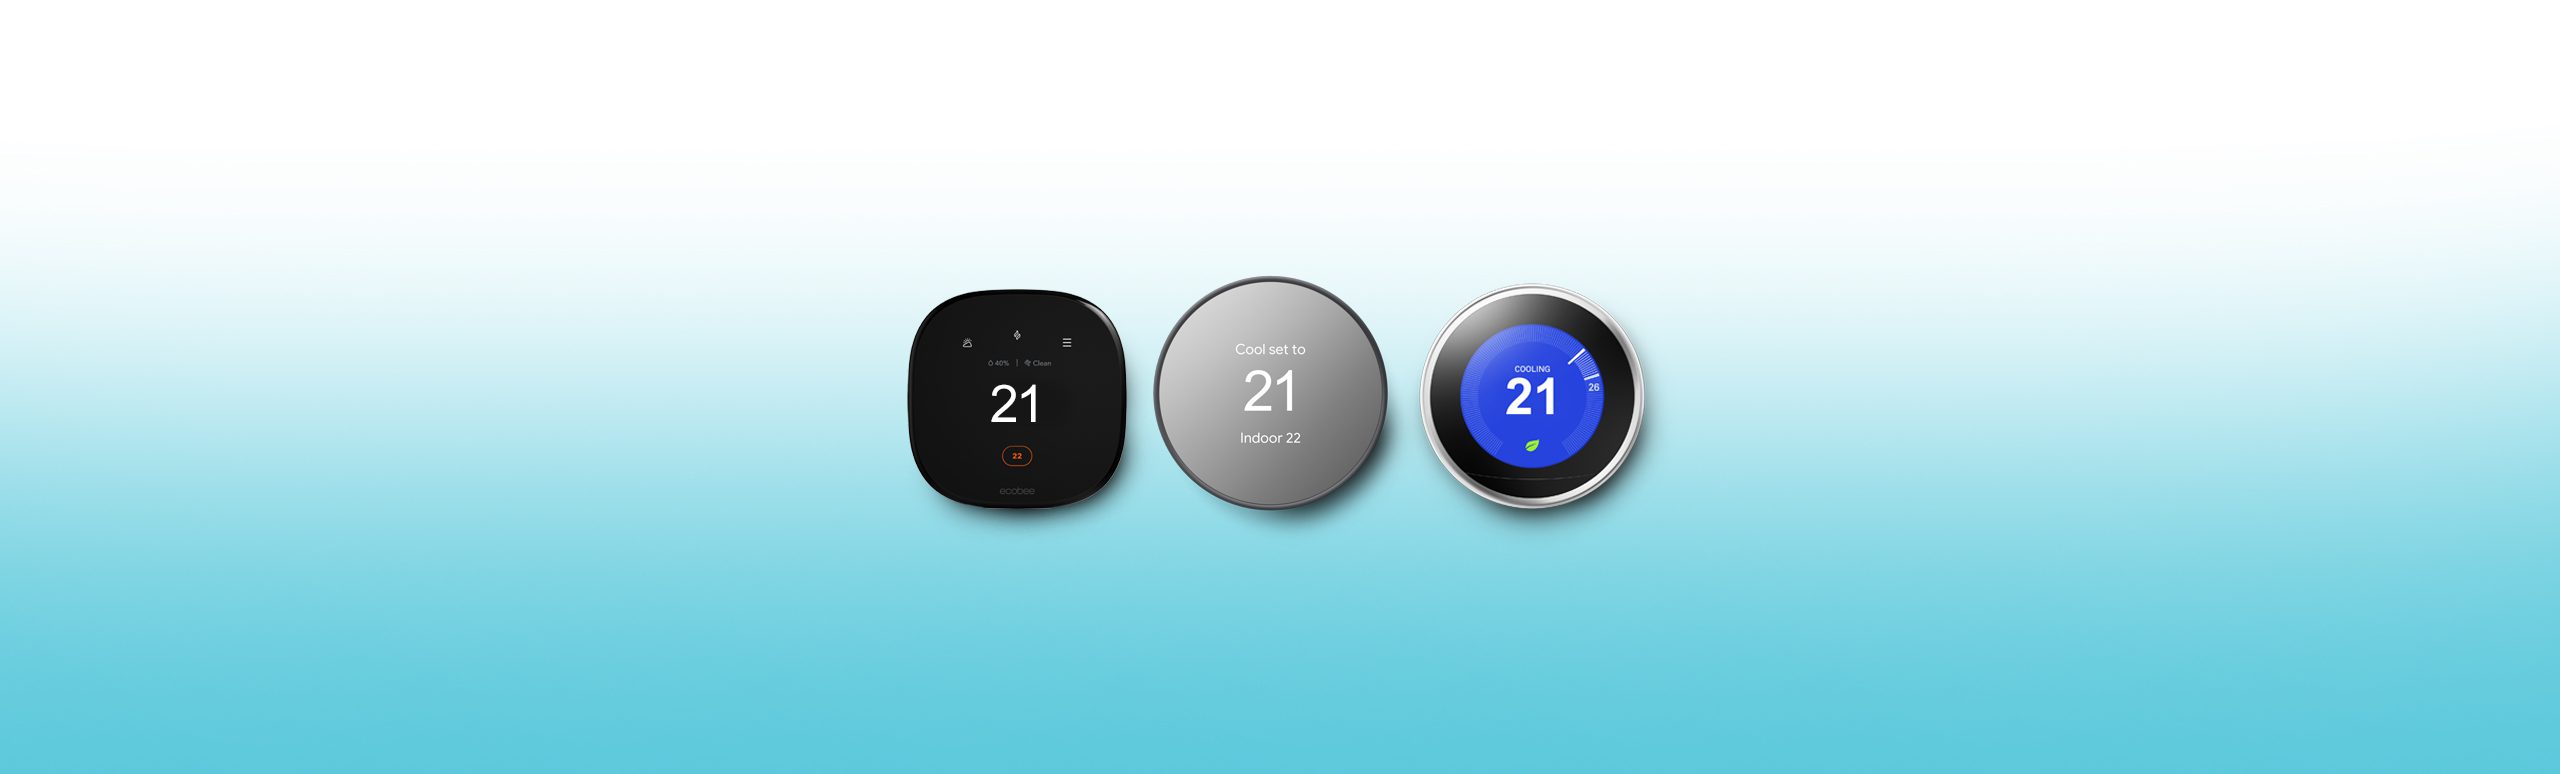 Double Perks offer with Eligible smart home thermostat featuring ecobee smart thermostat premium, Nest learning and nest thermostat